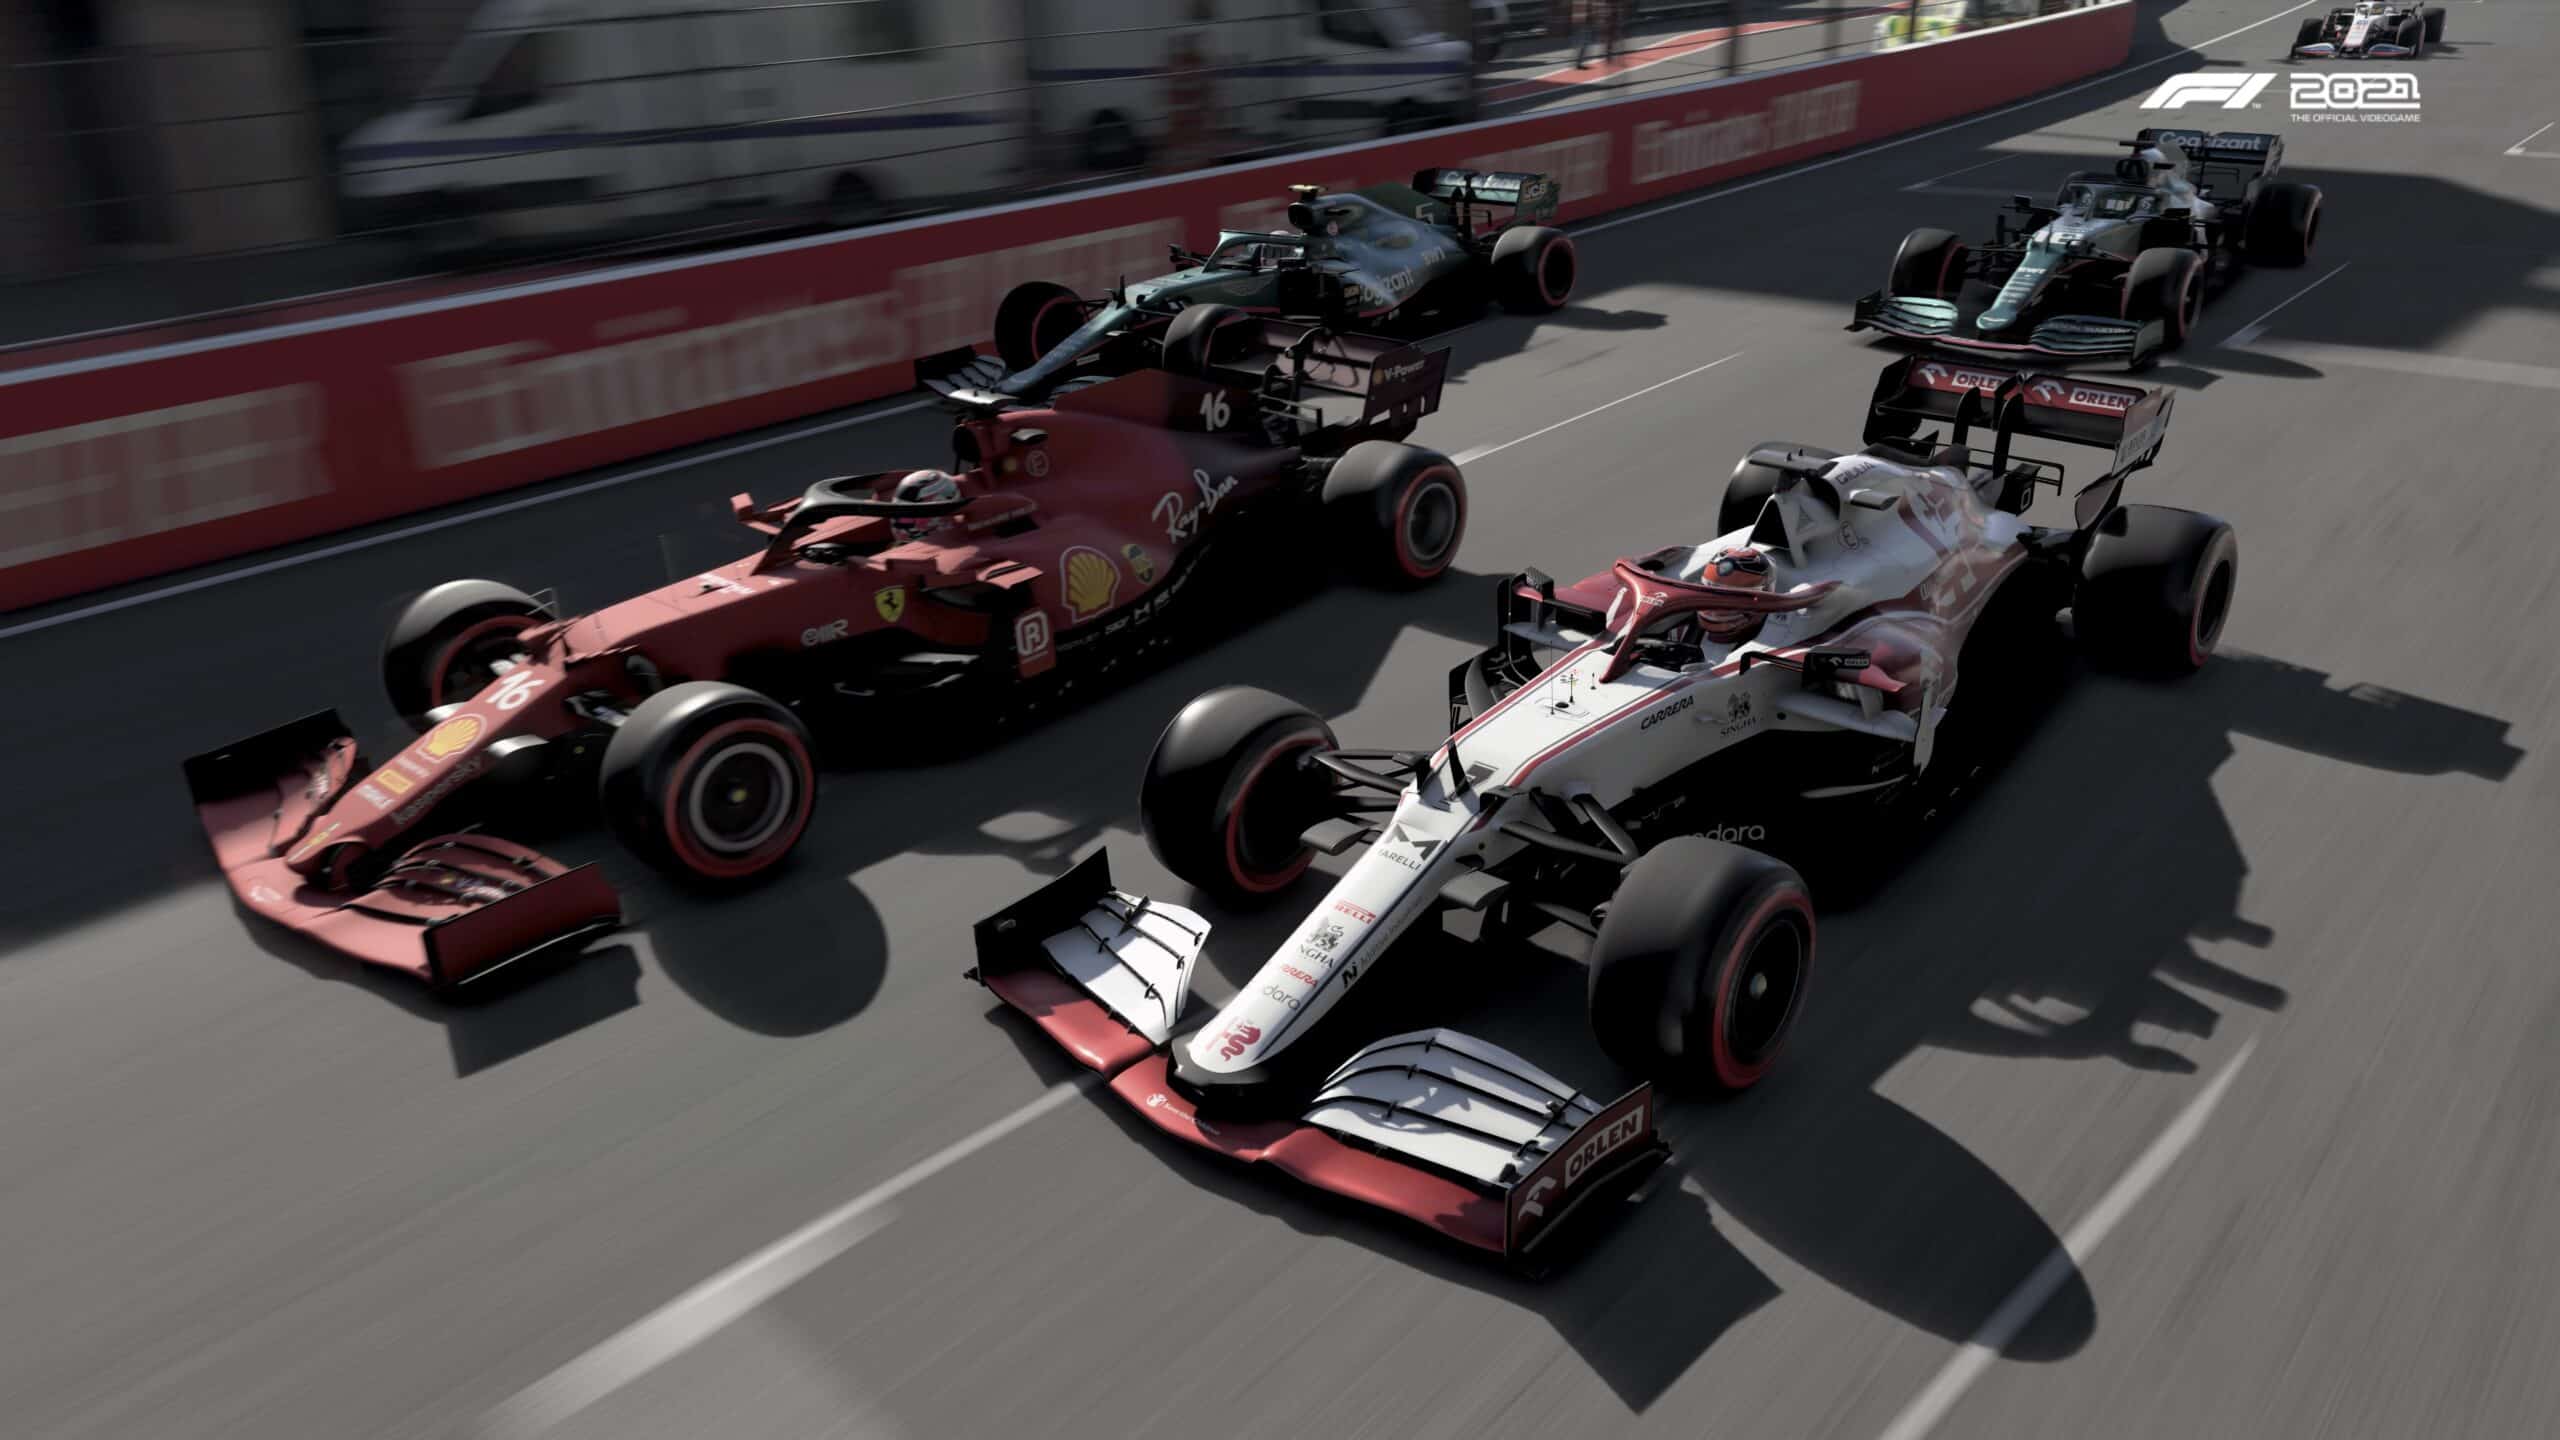 F1 2021 game patch 1.07 fixes Xbox online issues, re-adds PS5 3D audio Traxion